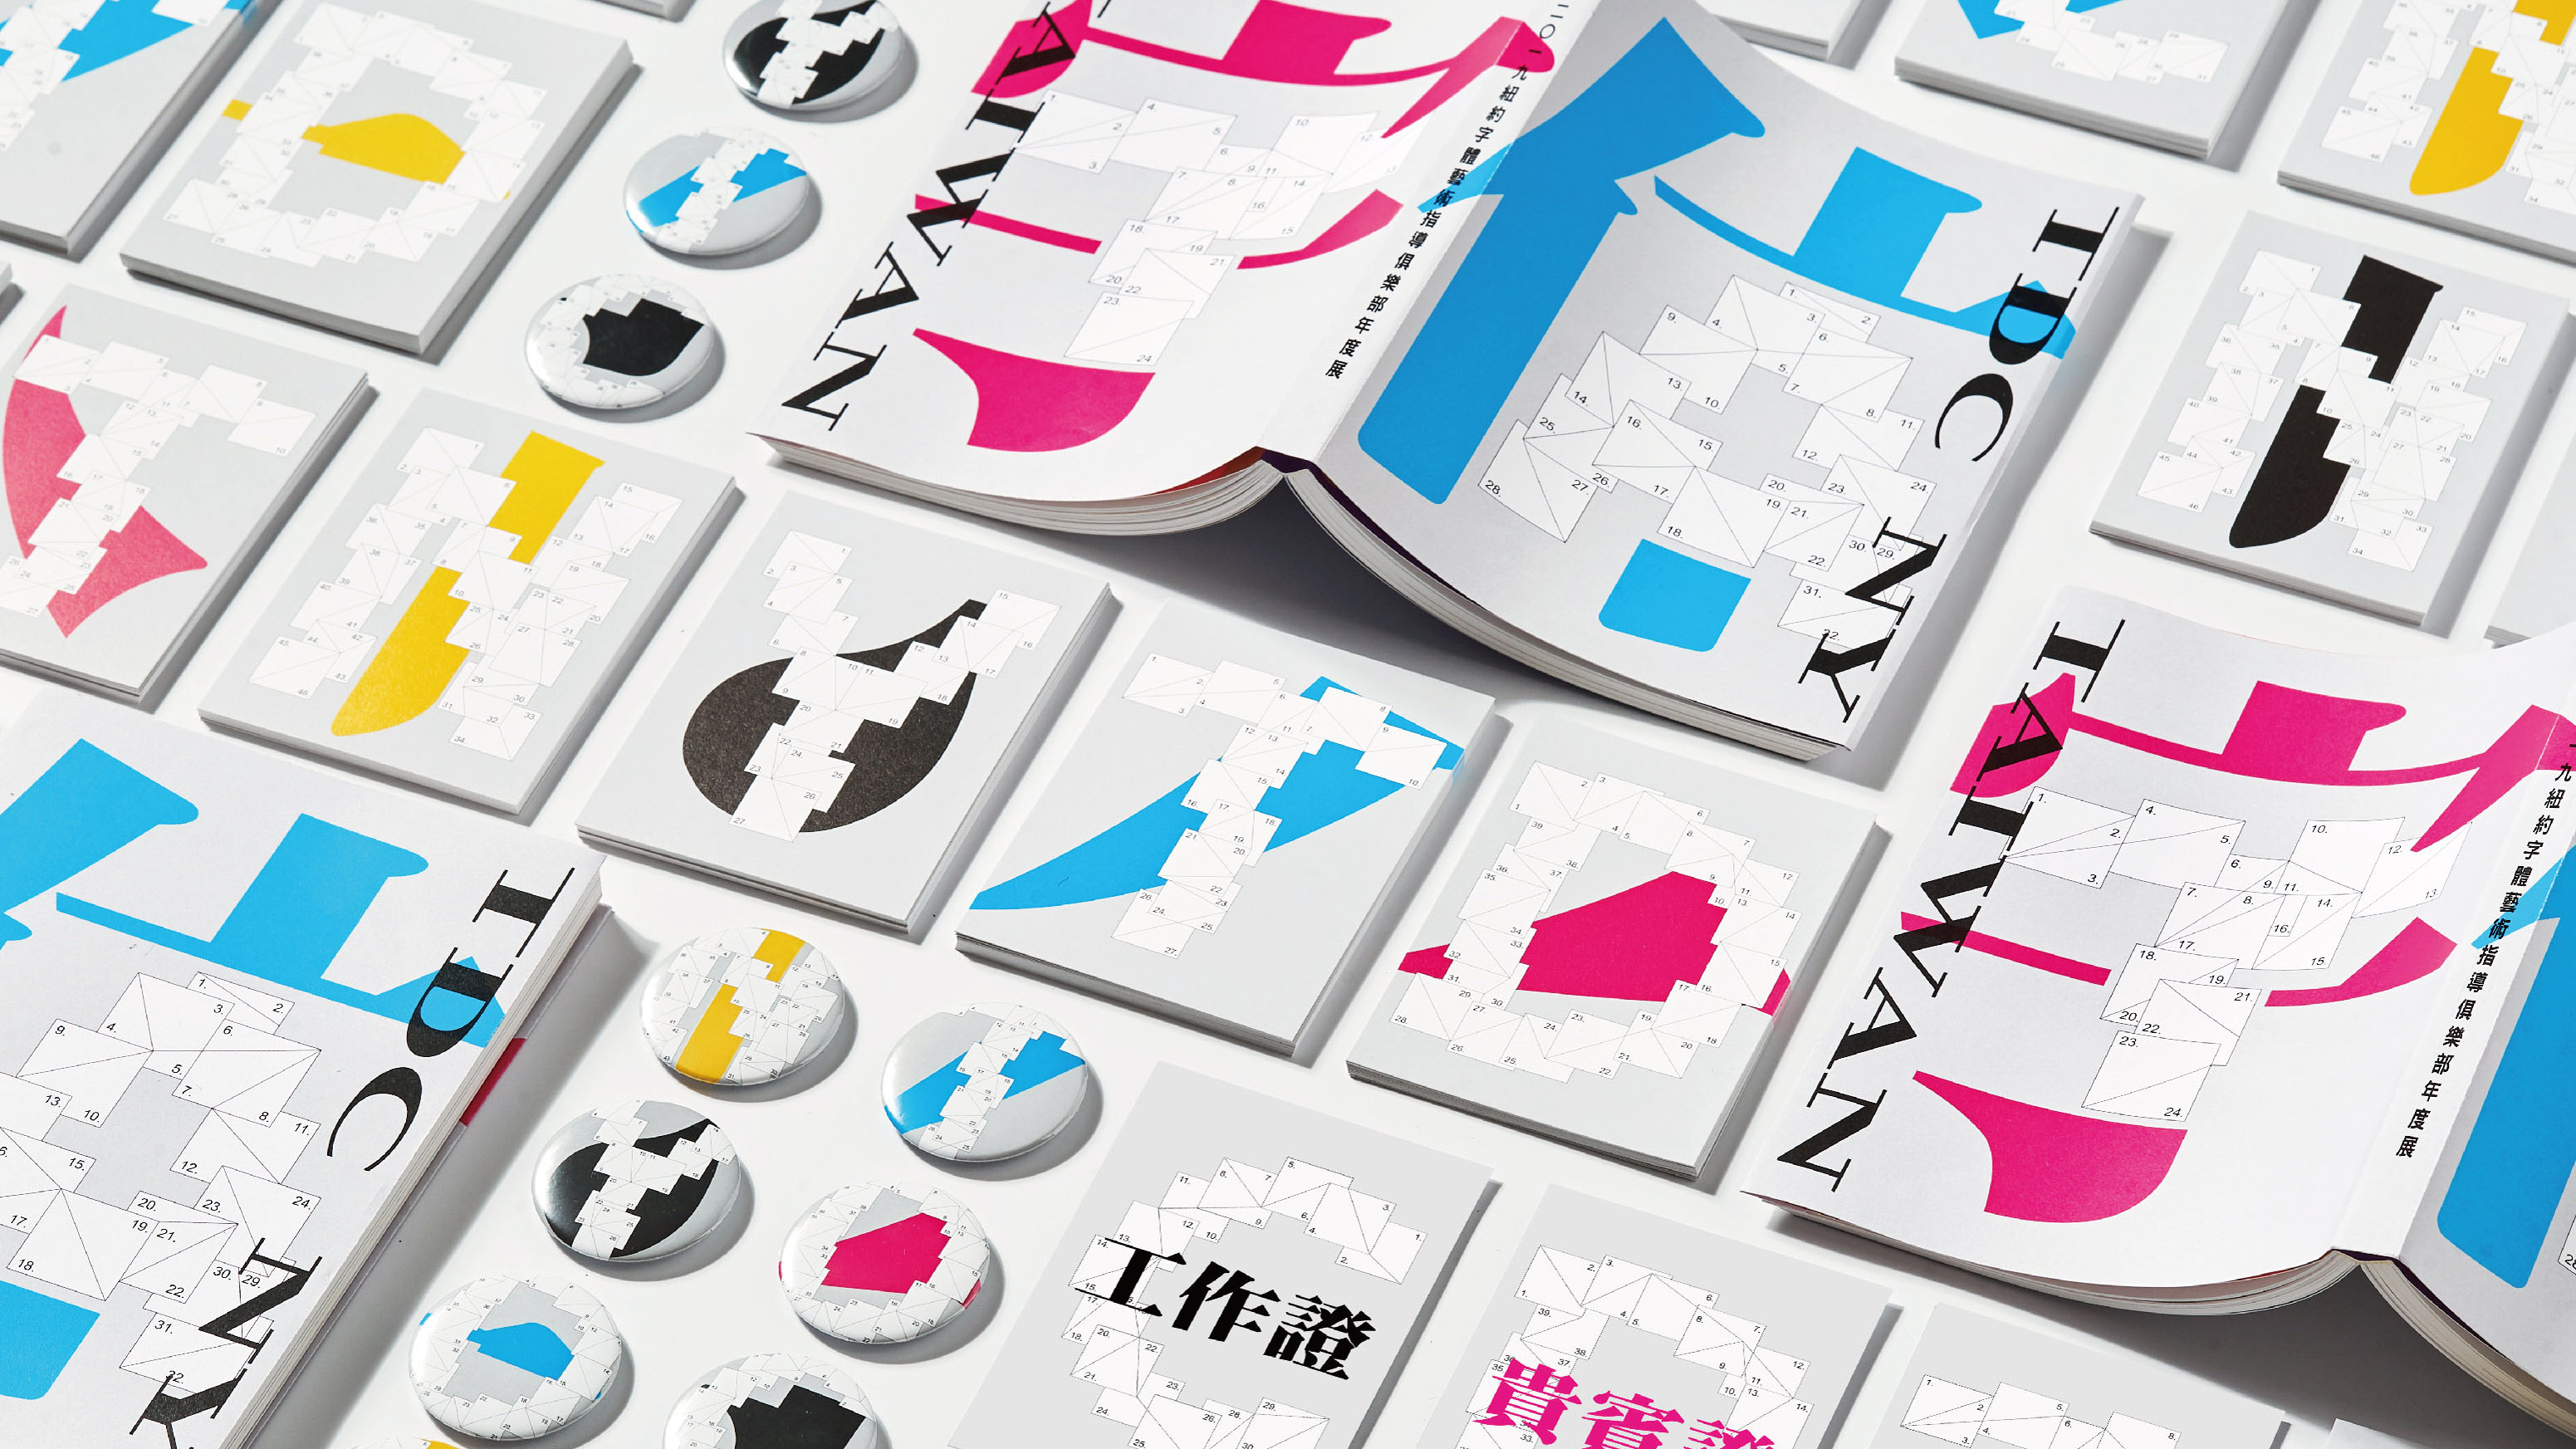 Type directors club annual exhibition in Taiwan